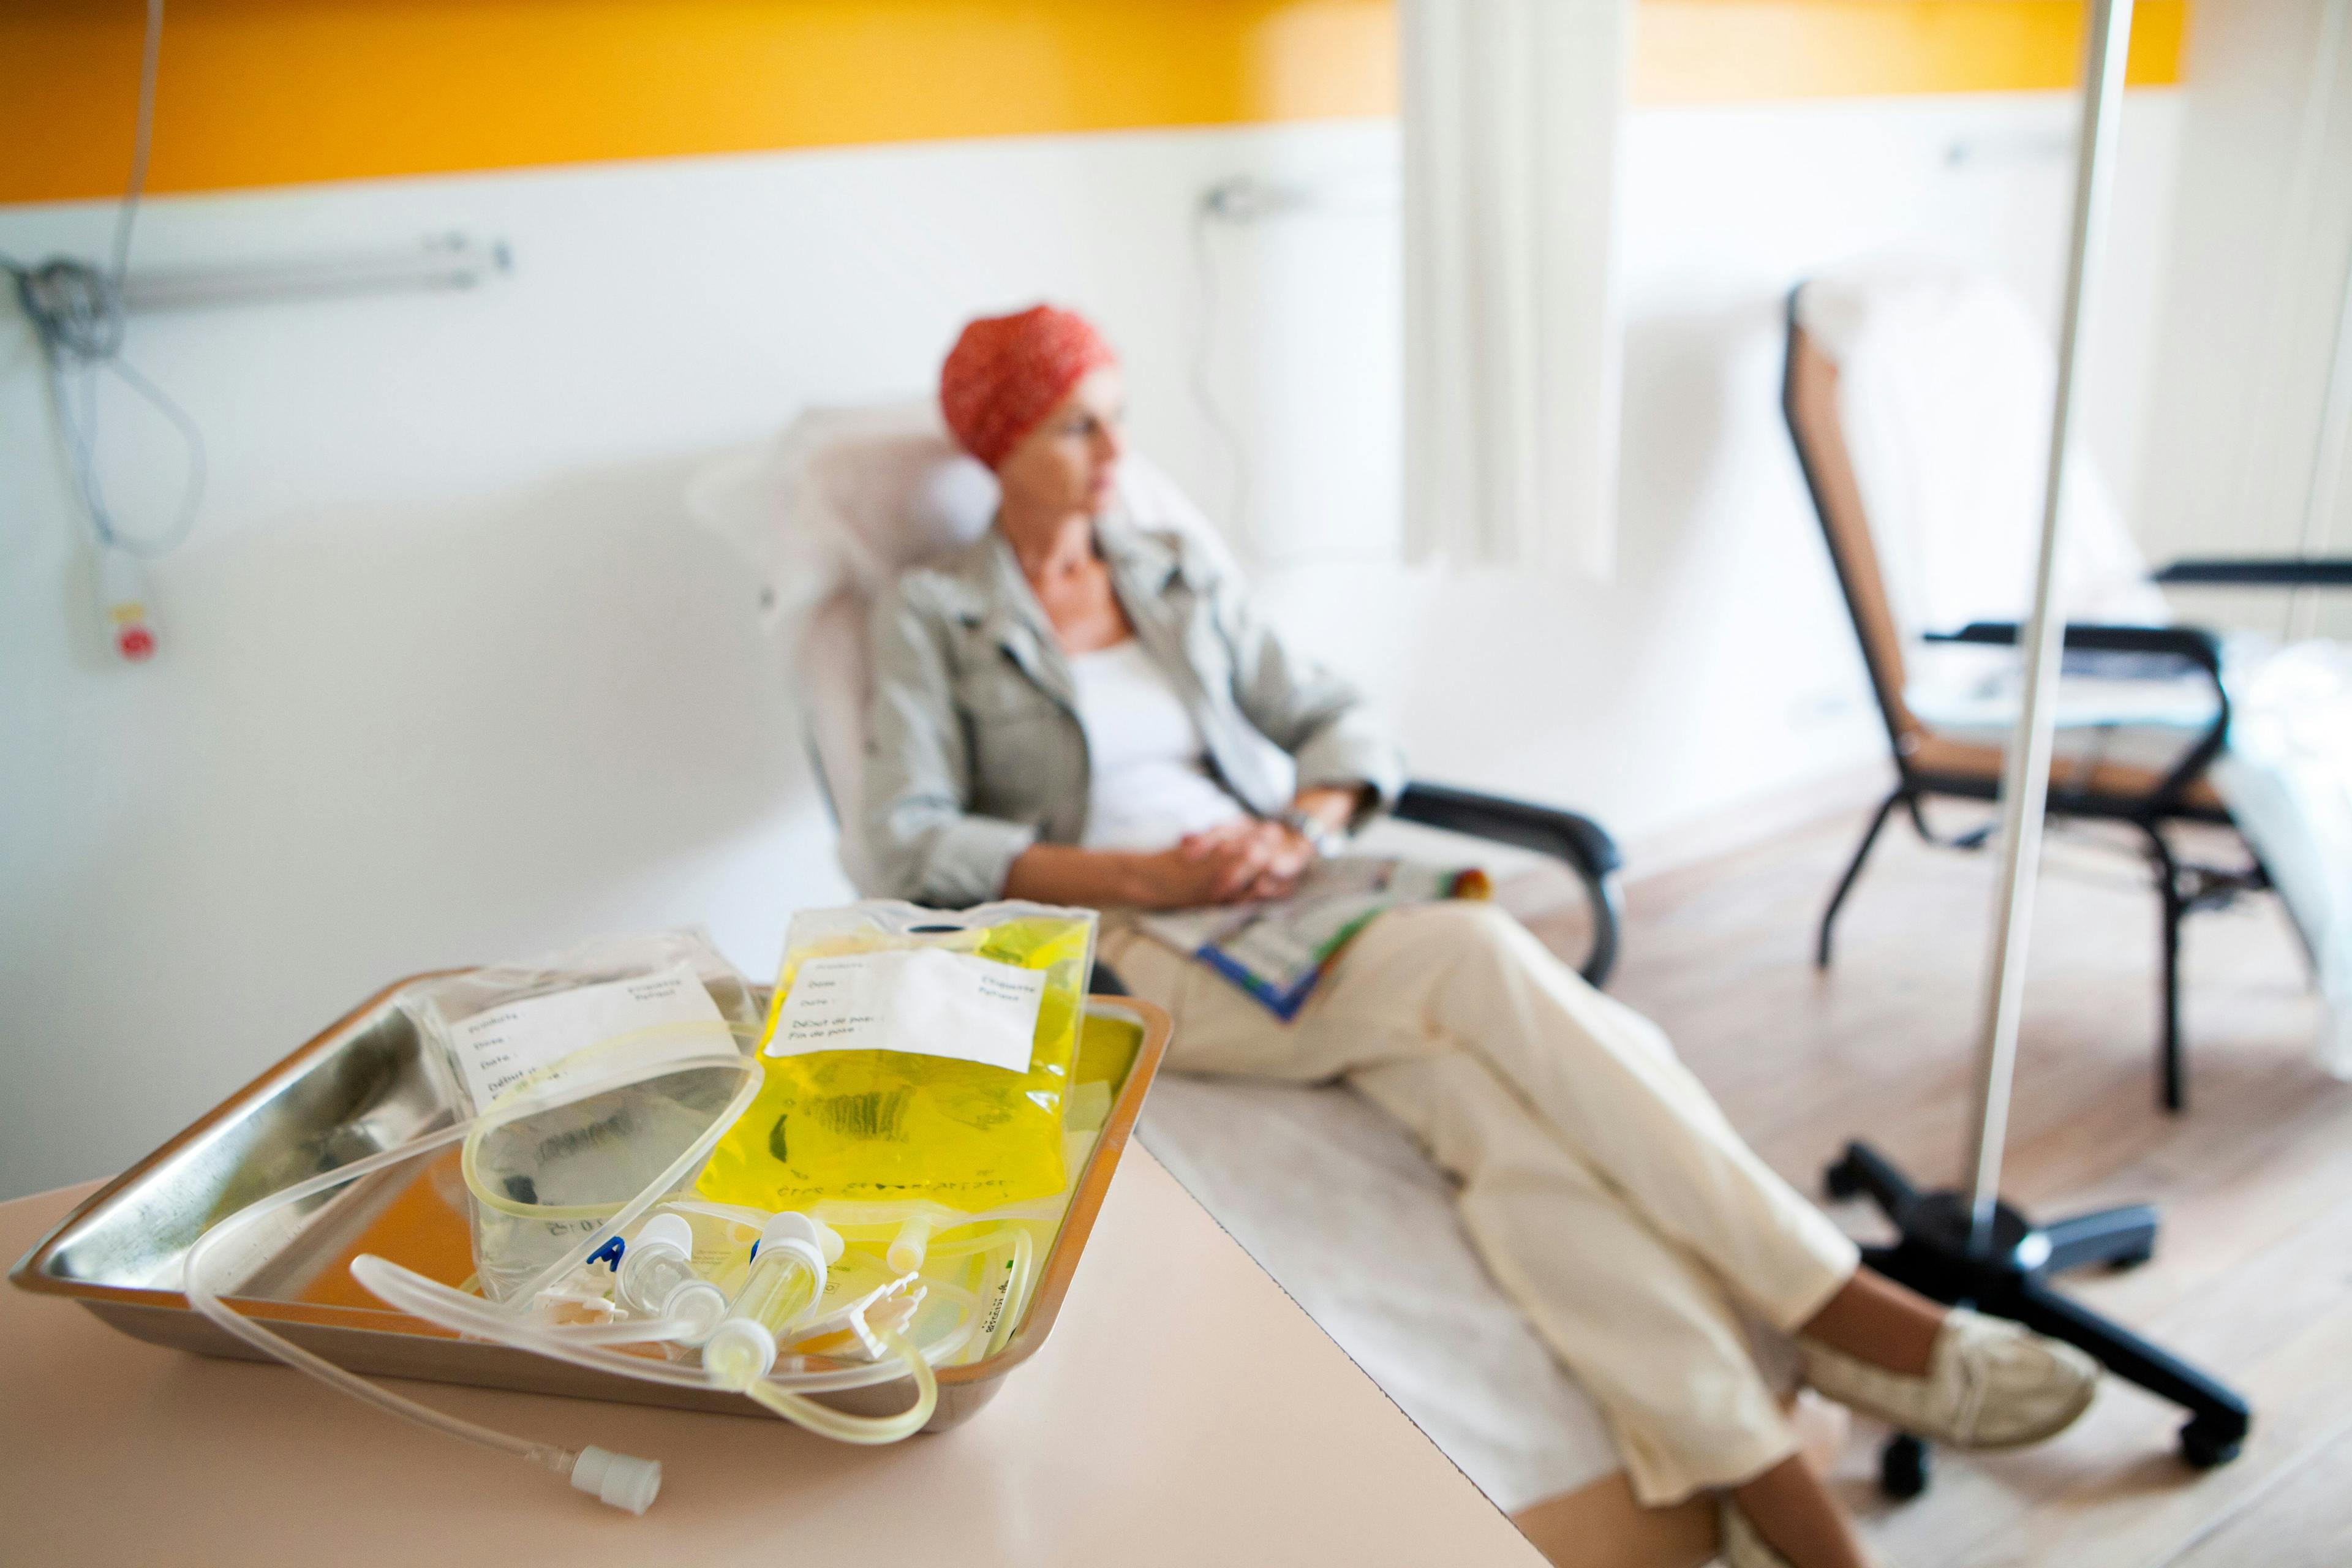 Woman receiving chemotherapy treatment